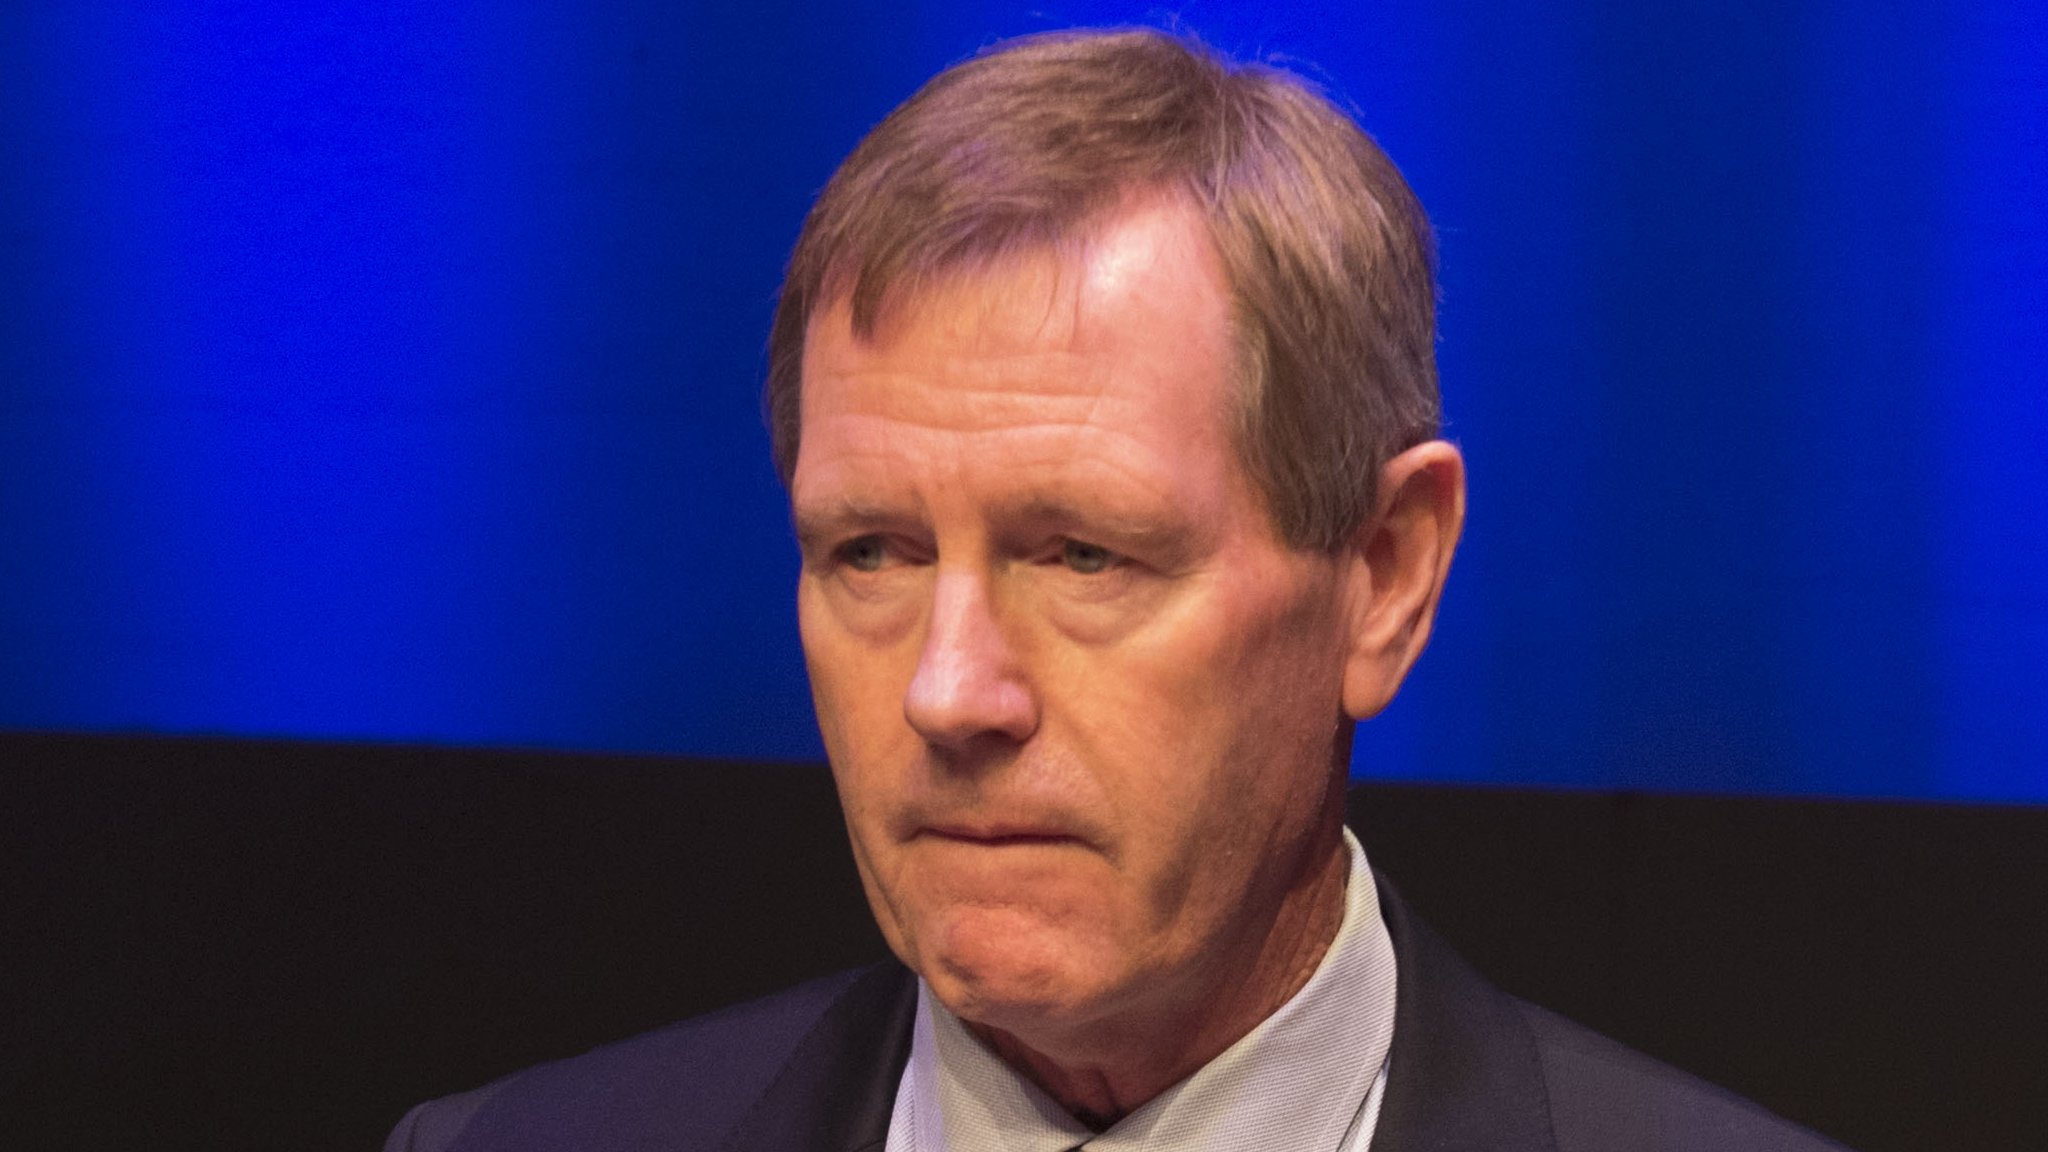 Rangers AGM: Chairman Dave King says progress made on manager hunt